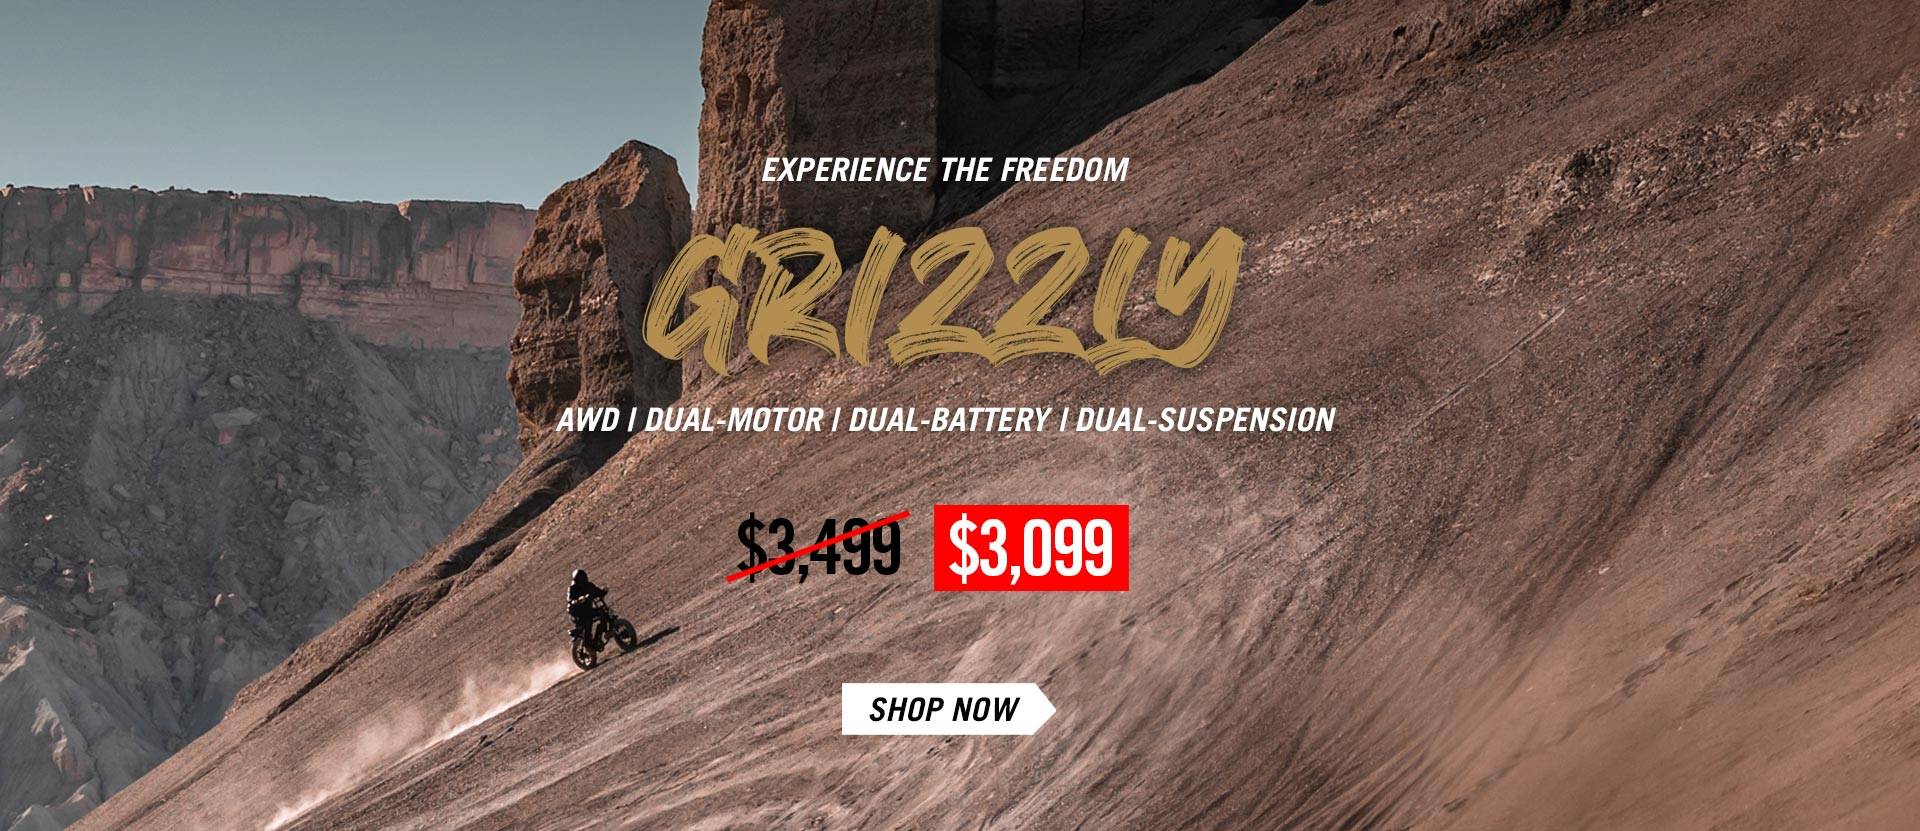 Grizzly Ebike Sale